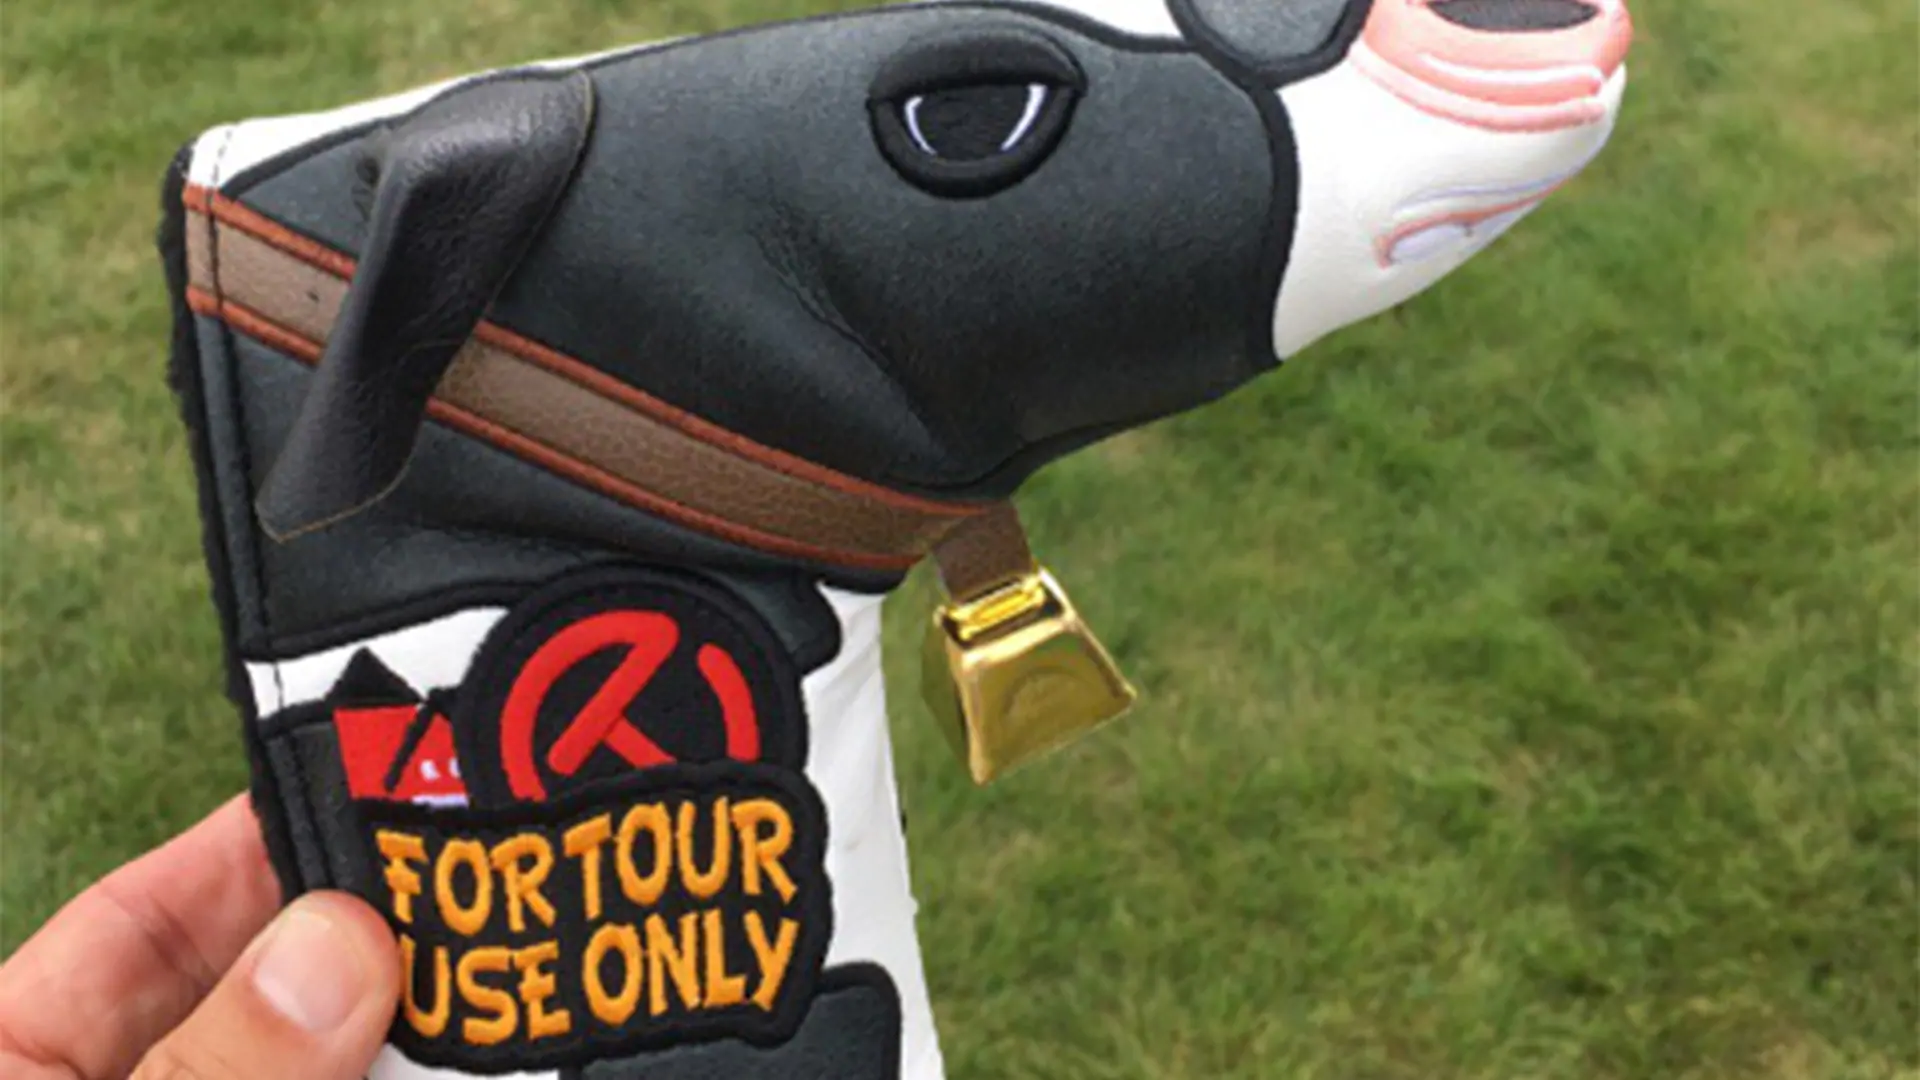 U.S. Open cow-themed head covers are amazing